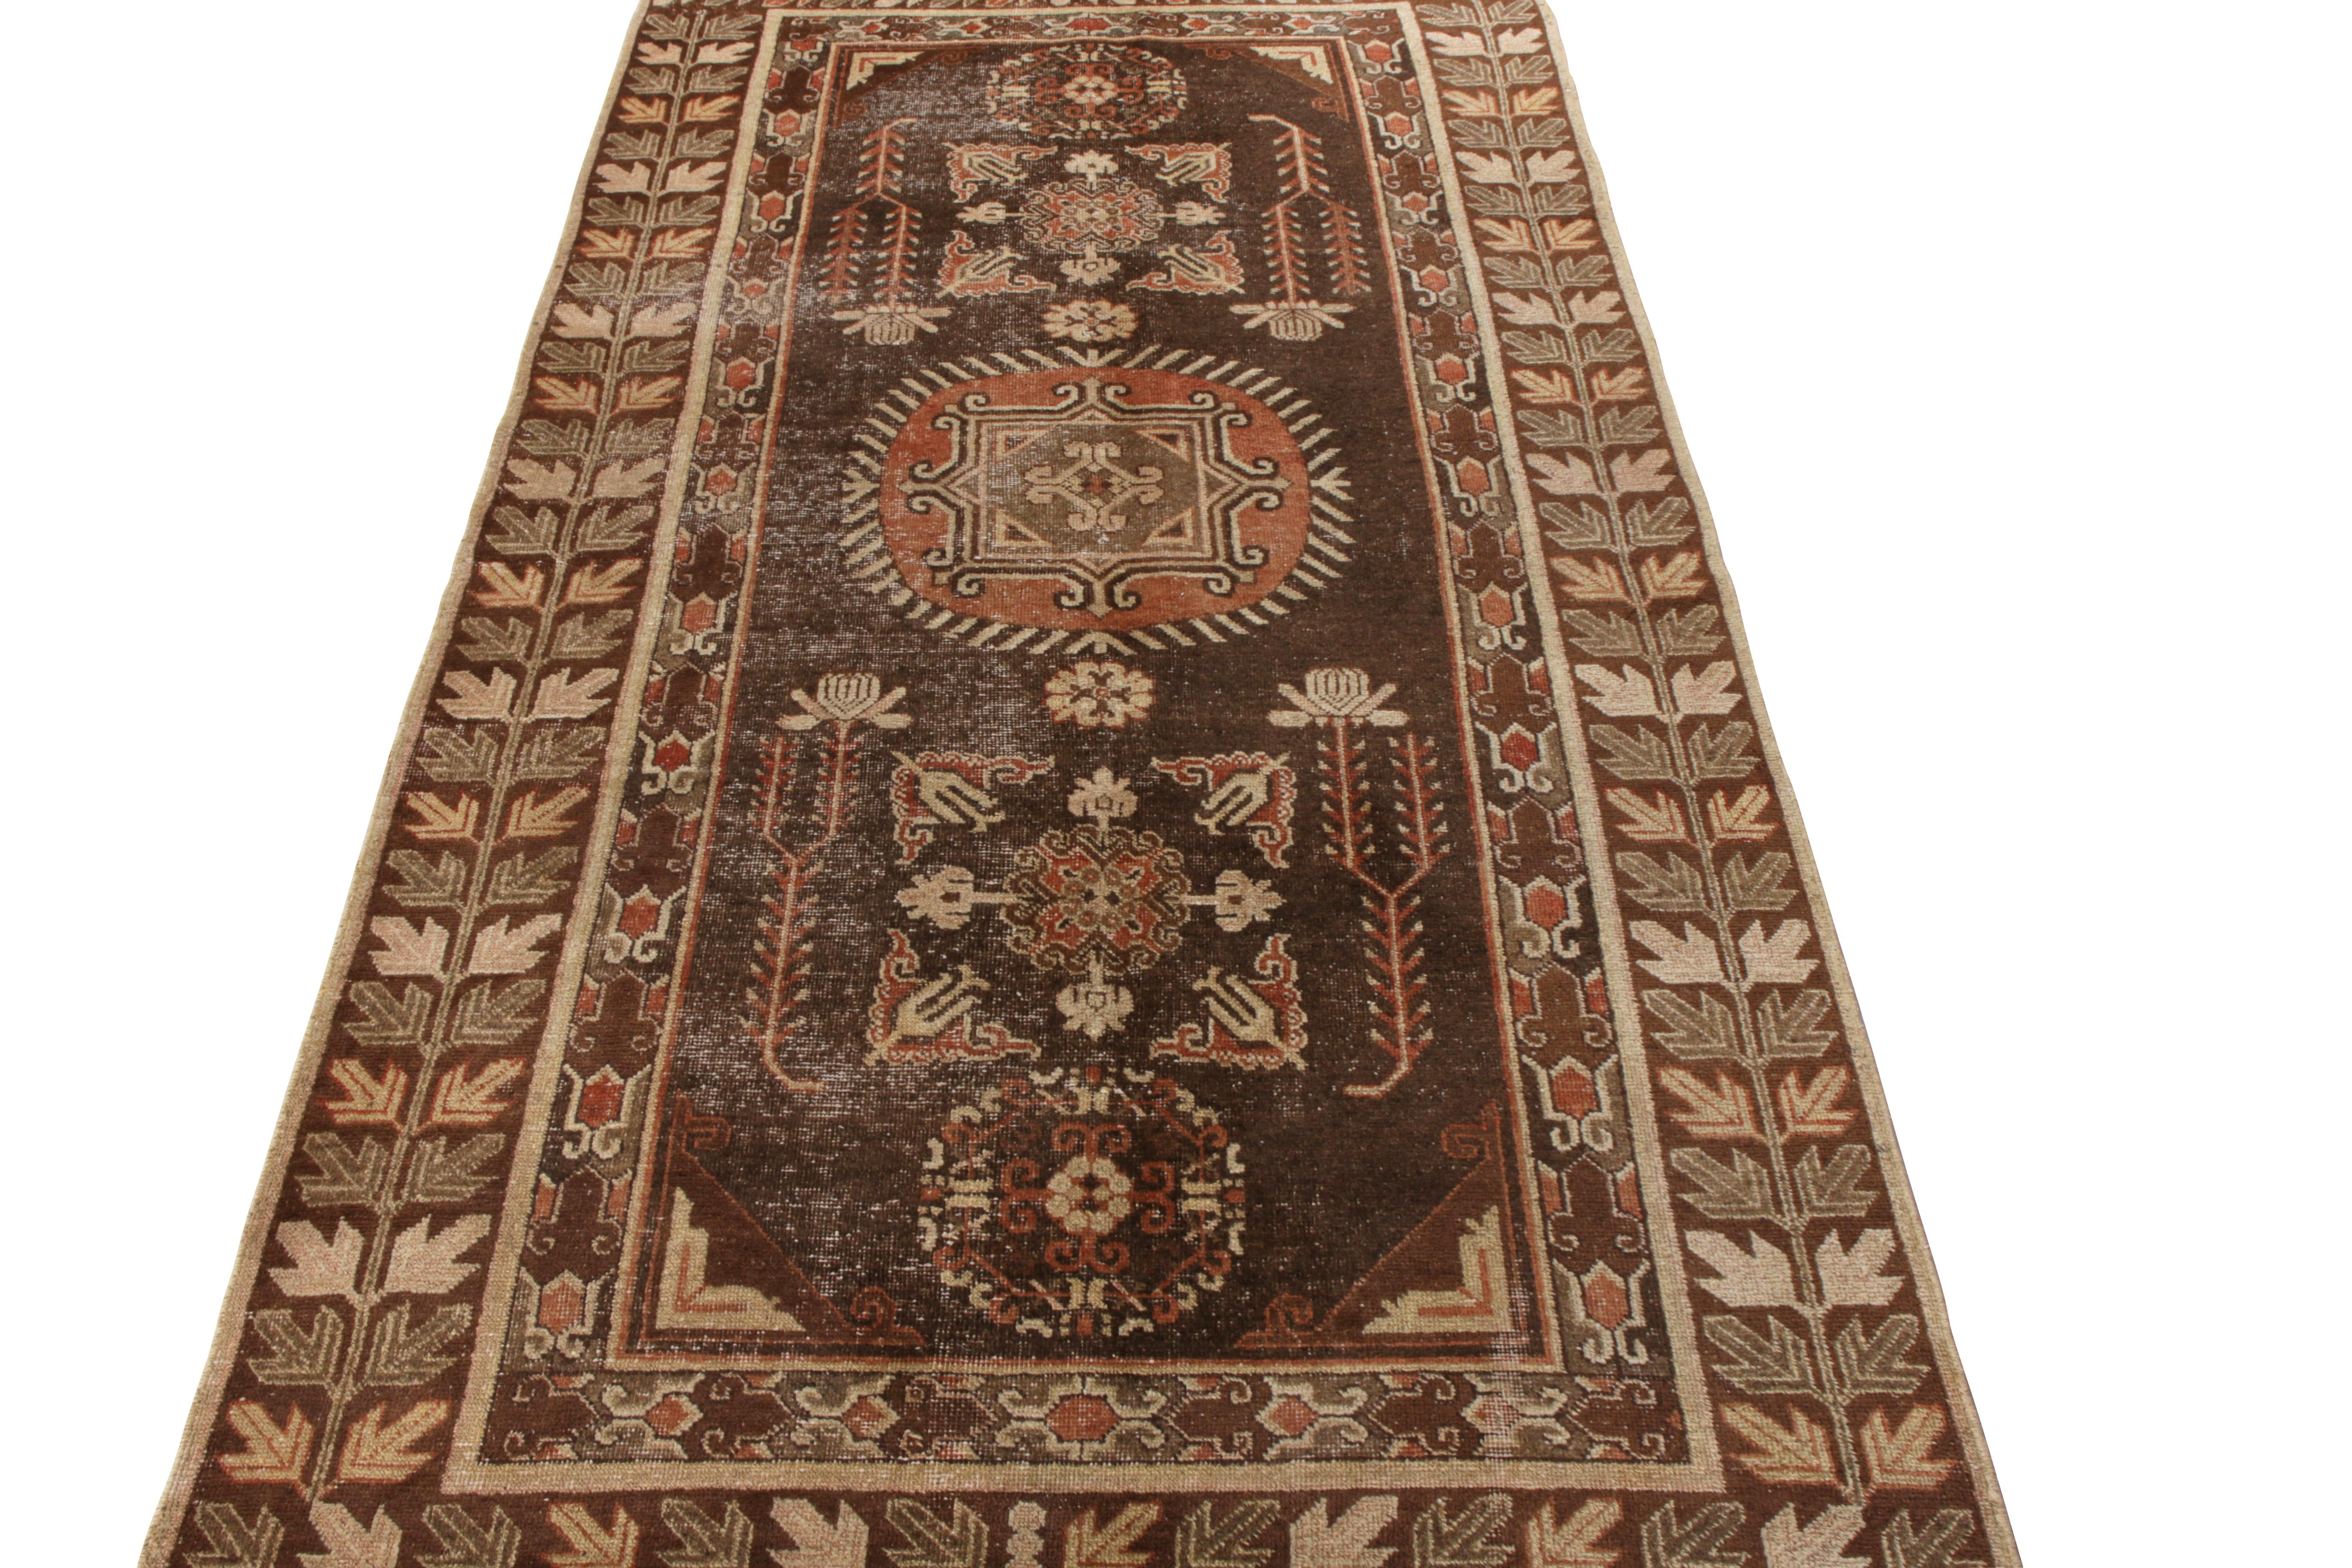 Hand knotted in rare quality wool, this 5x10 antique Khotan runner originates from East Turkestan circa 1920-1930. This rustic drawing enjoys a blissful union of patterns in an abrashed colorway of rust red, beige, brown with light green and orange